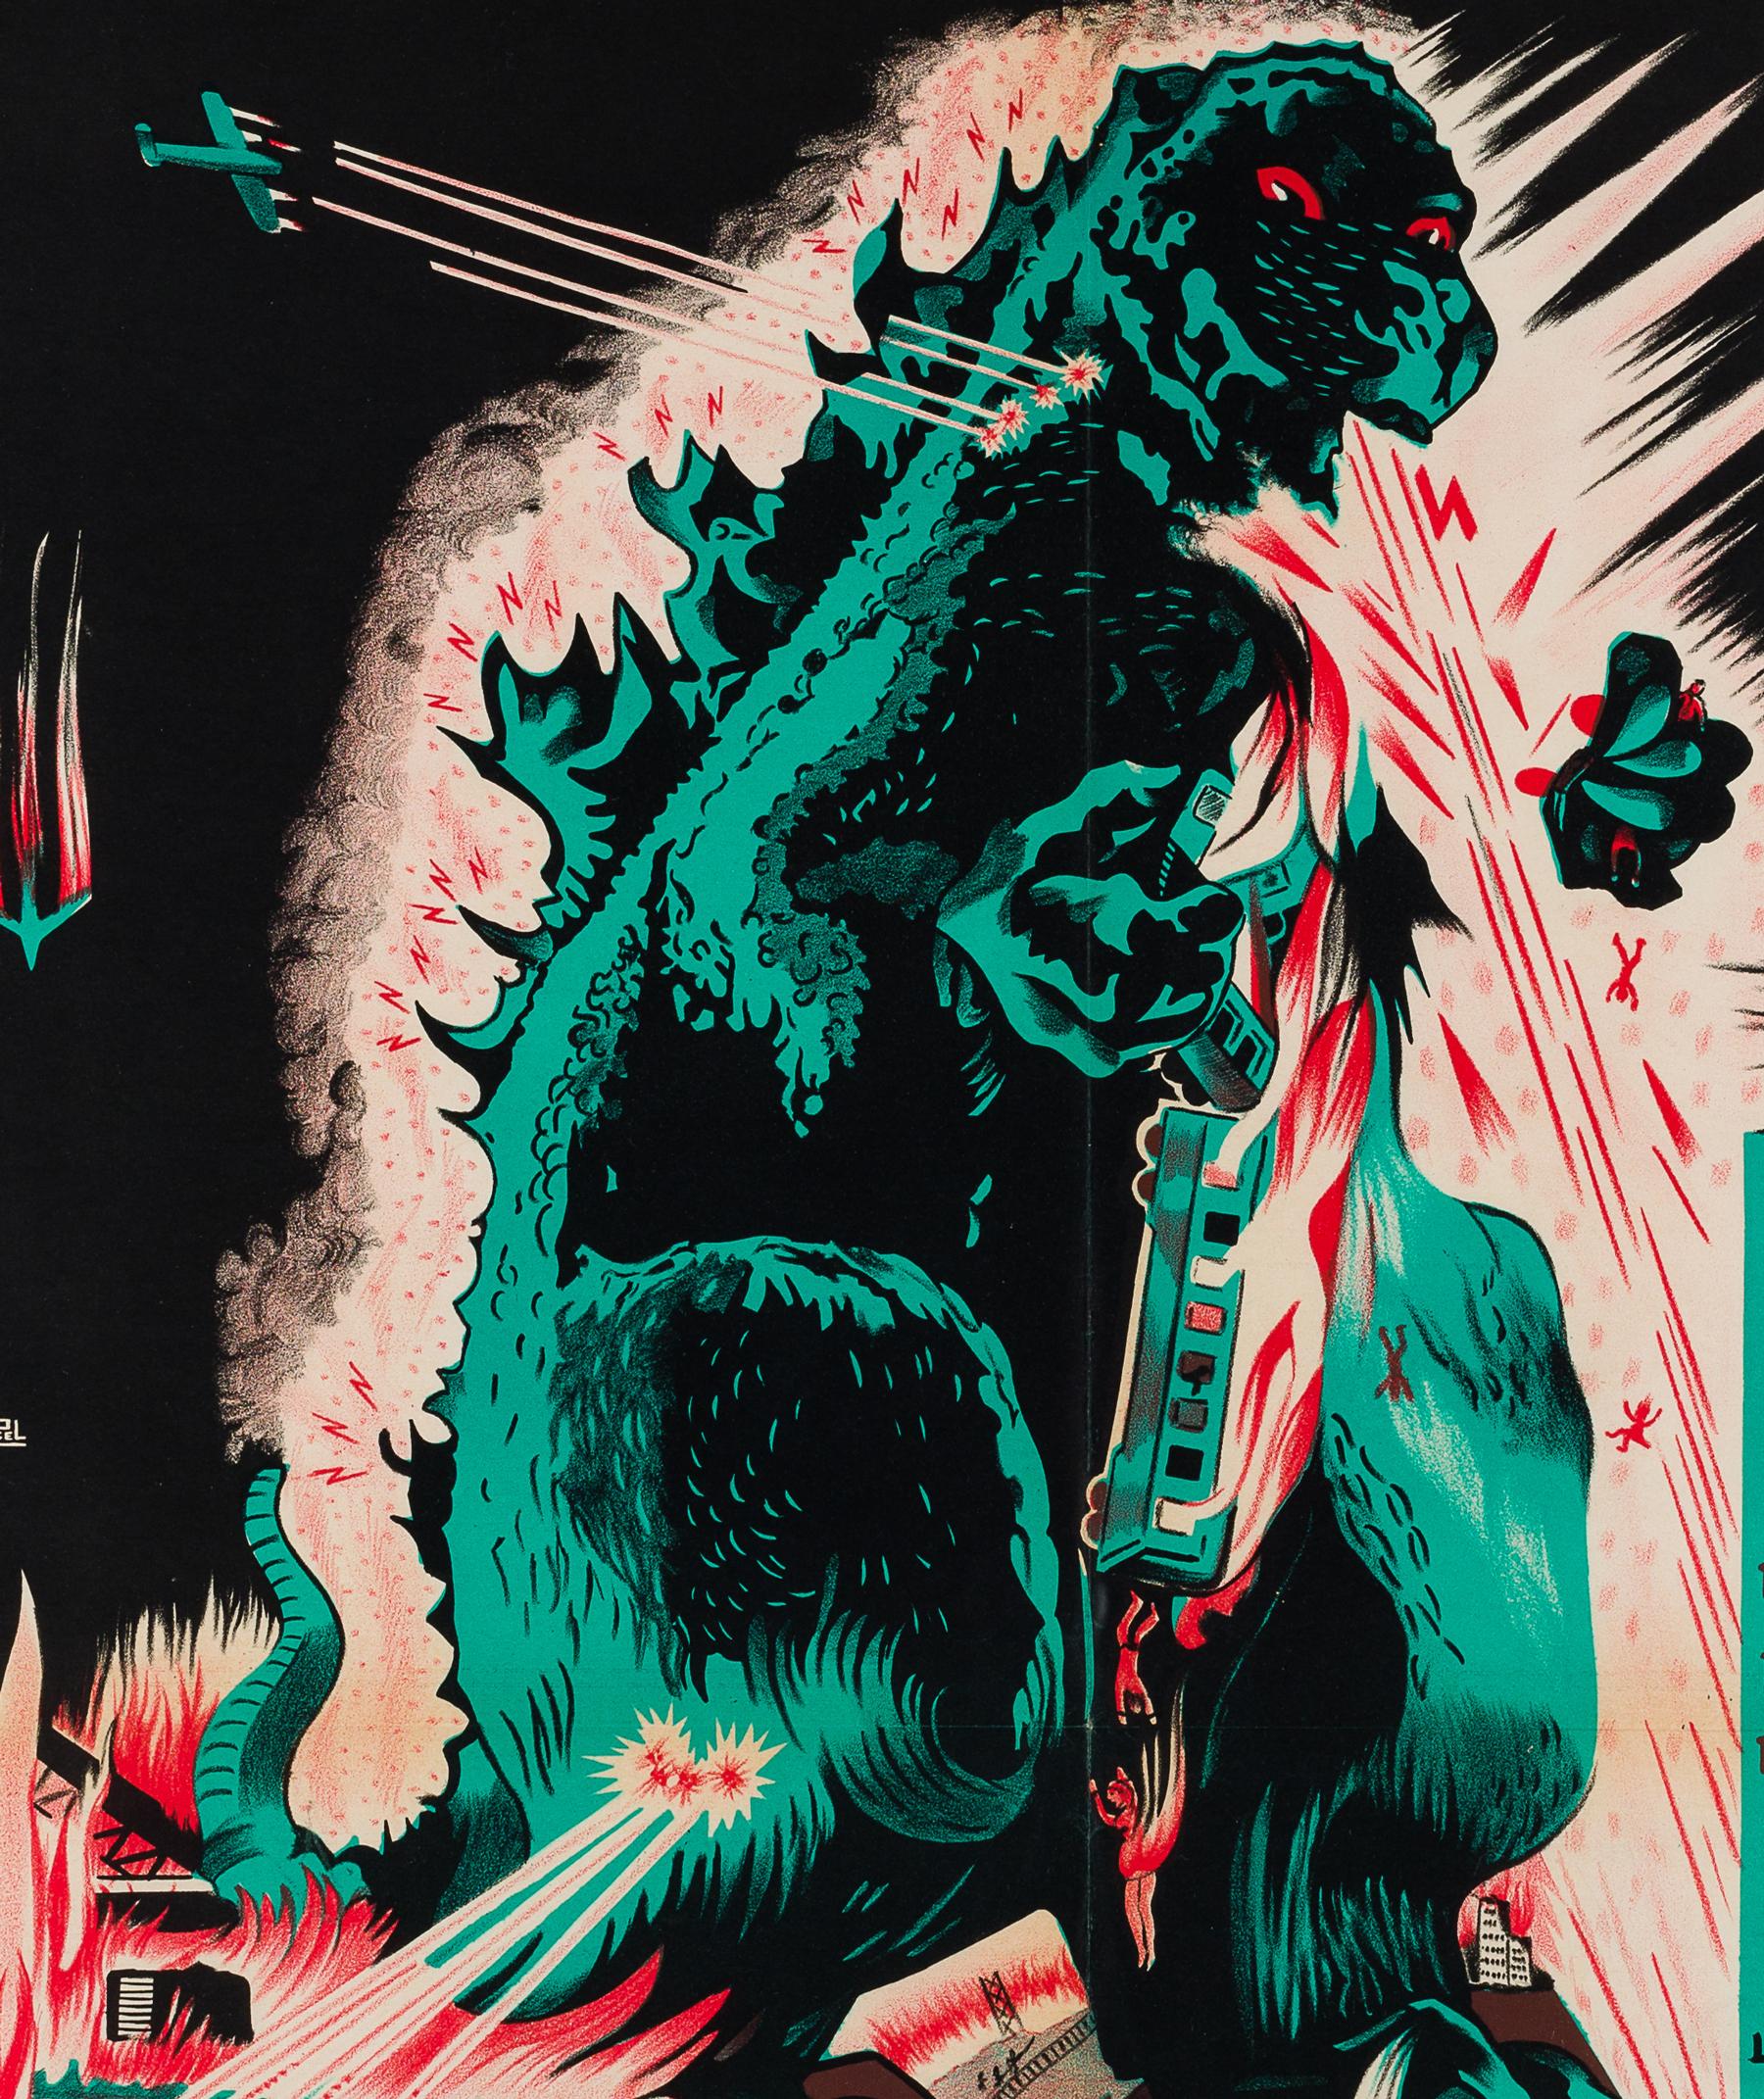 Rare and highly sought after late 1950s, French re-release for 1954s film Godzilla. Wonderful red, green, black and white graphics.

Movie poster size 23 1/2 x 31 1/2 inches. Near mint.

Folded (as issued). Paper darkened with age. Amazing